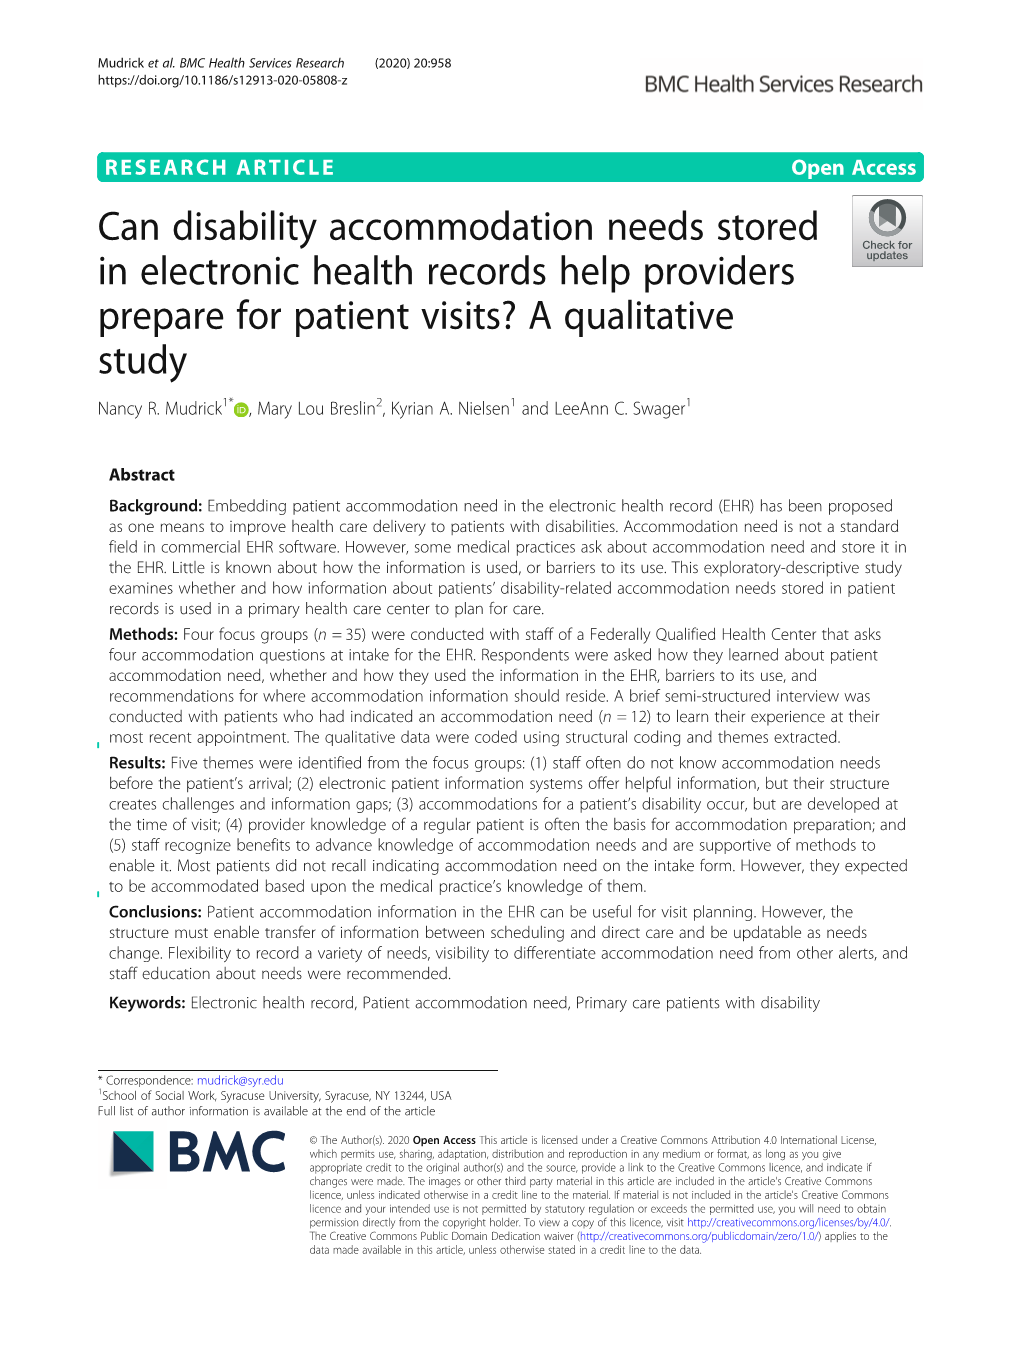 Can Disability Accommodation Needs Stored in Electronic Health Records Help Providers Prepare for Patient Visits? a Qualitative Study Nancy R